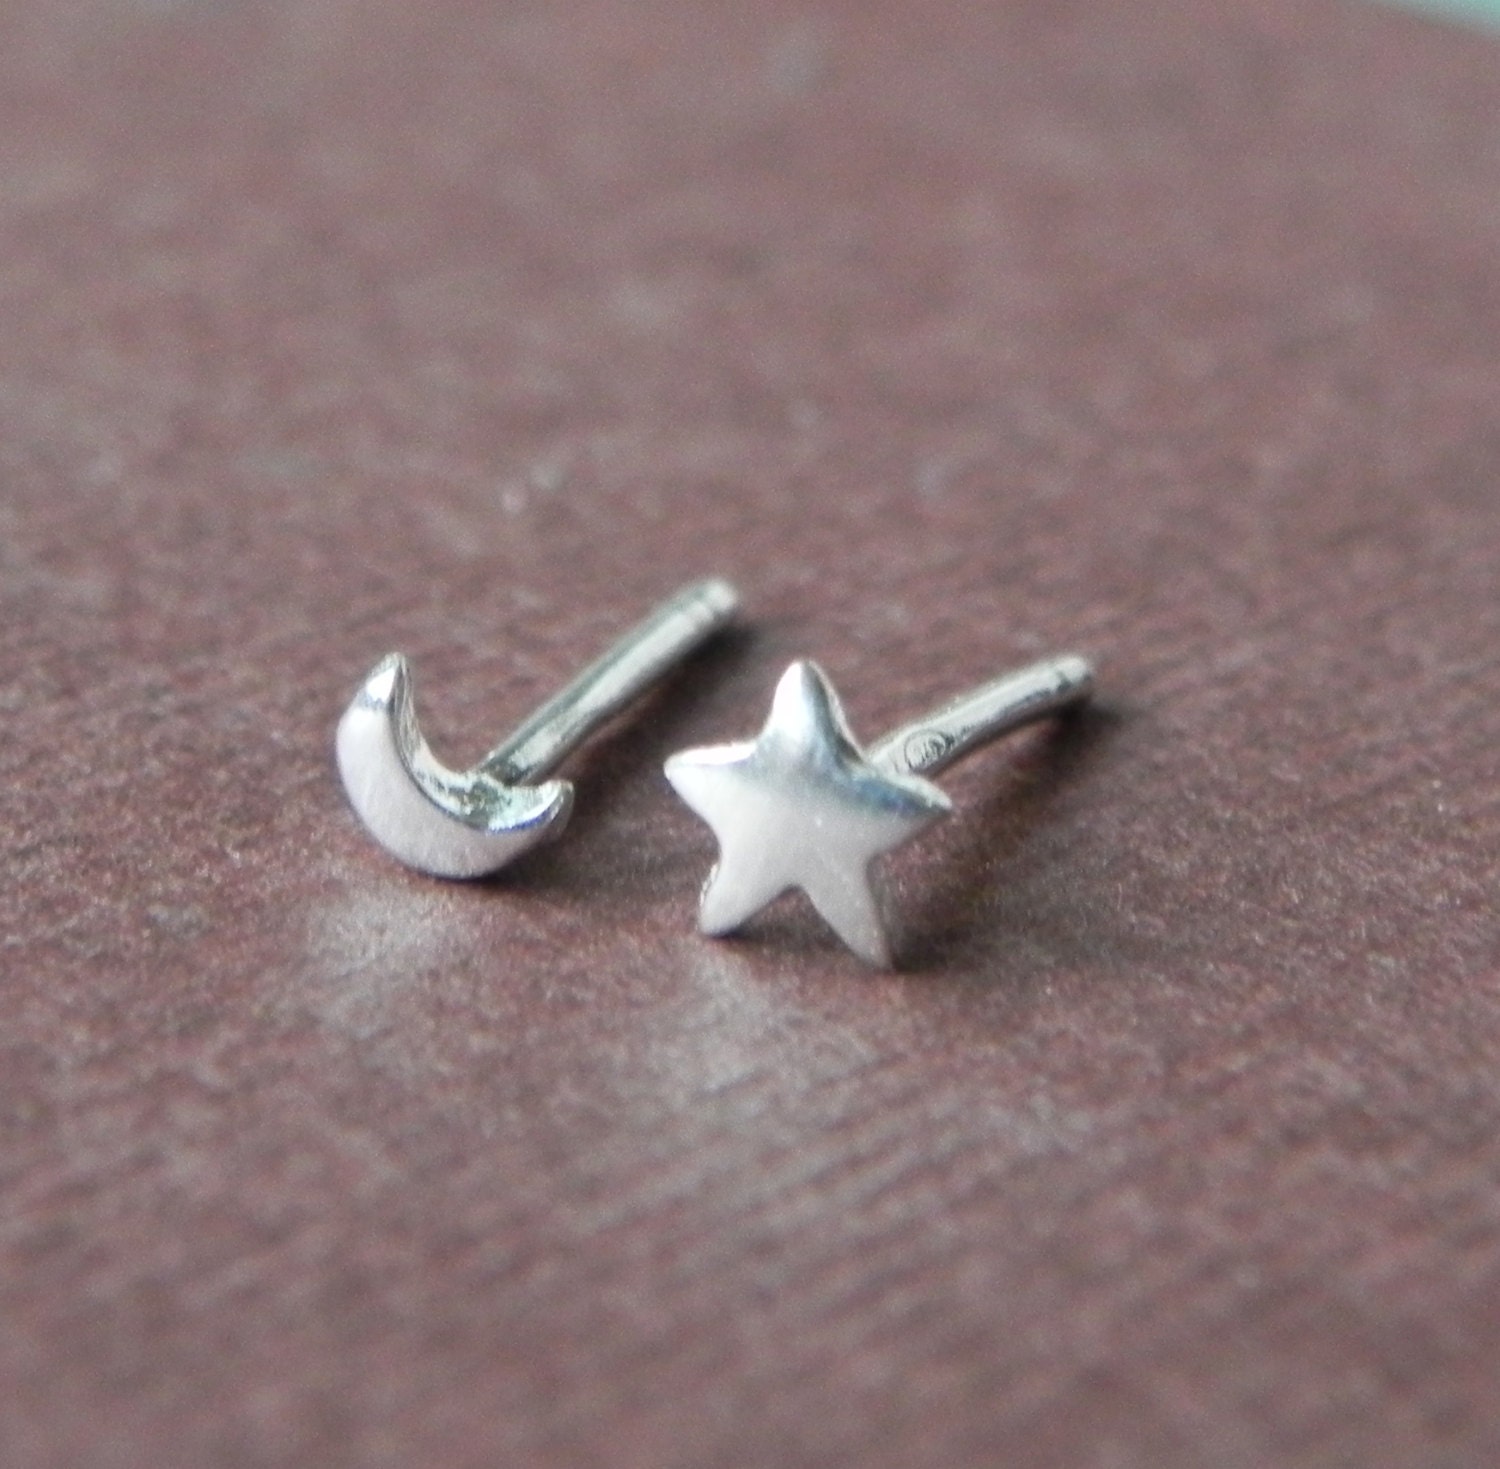 So tiny star and crescent moon stud earrings in sterling silver - nose studs